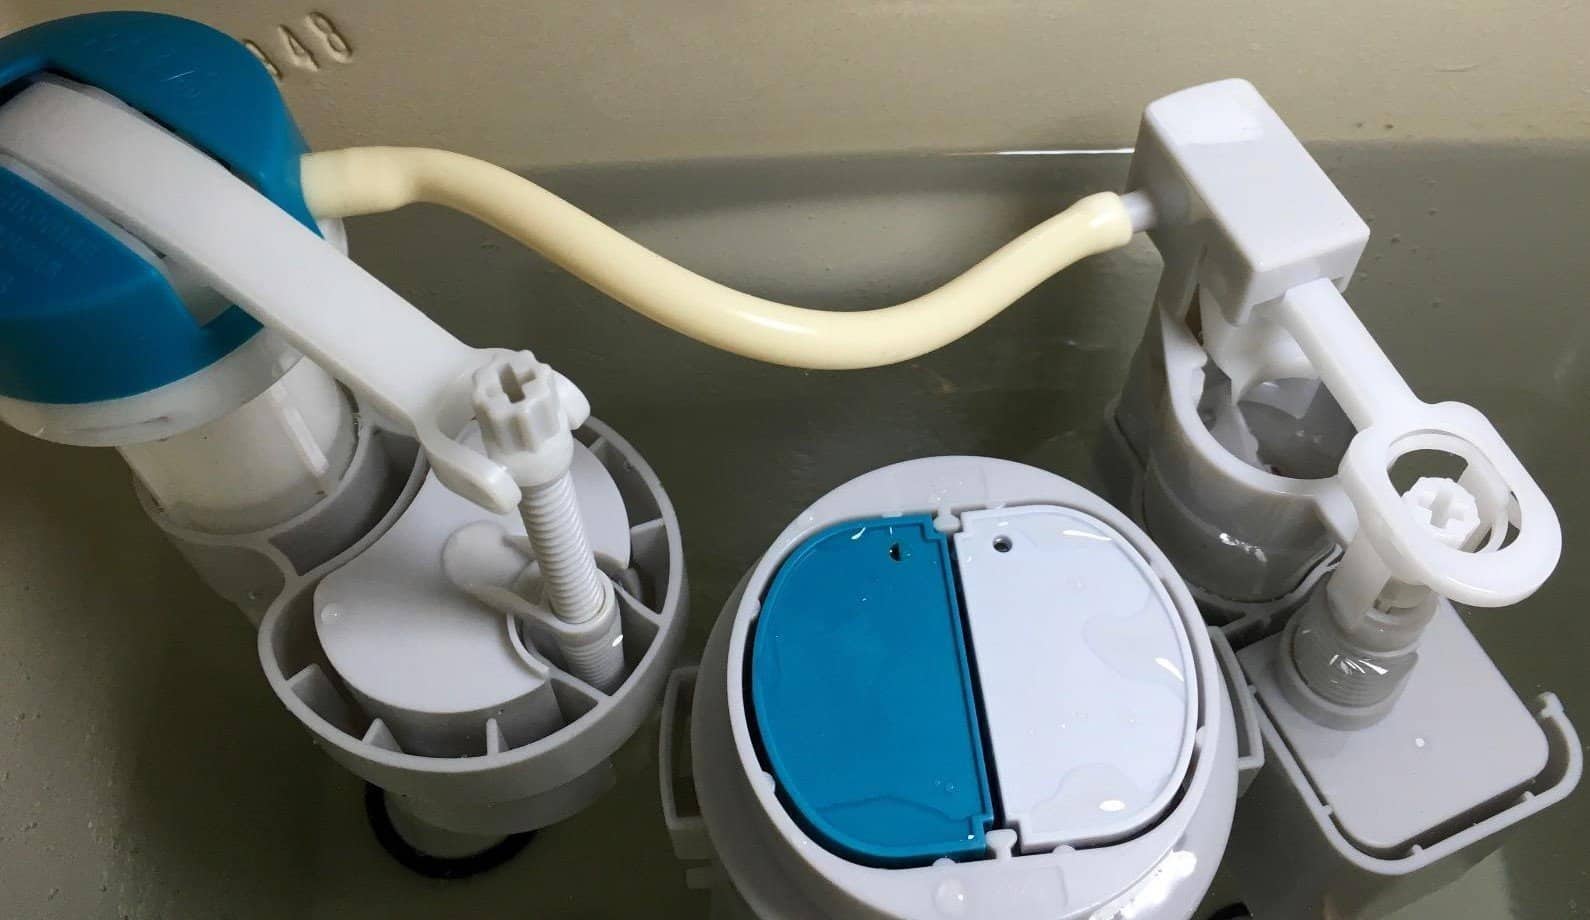 How to Adjust Water Level in Toilet Bowl